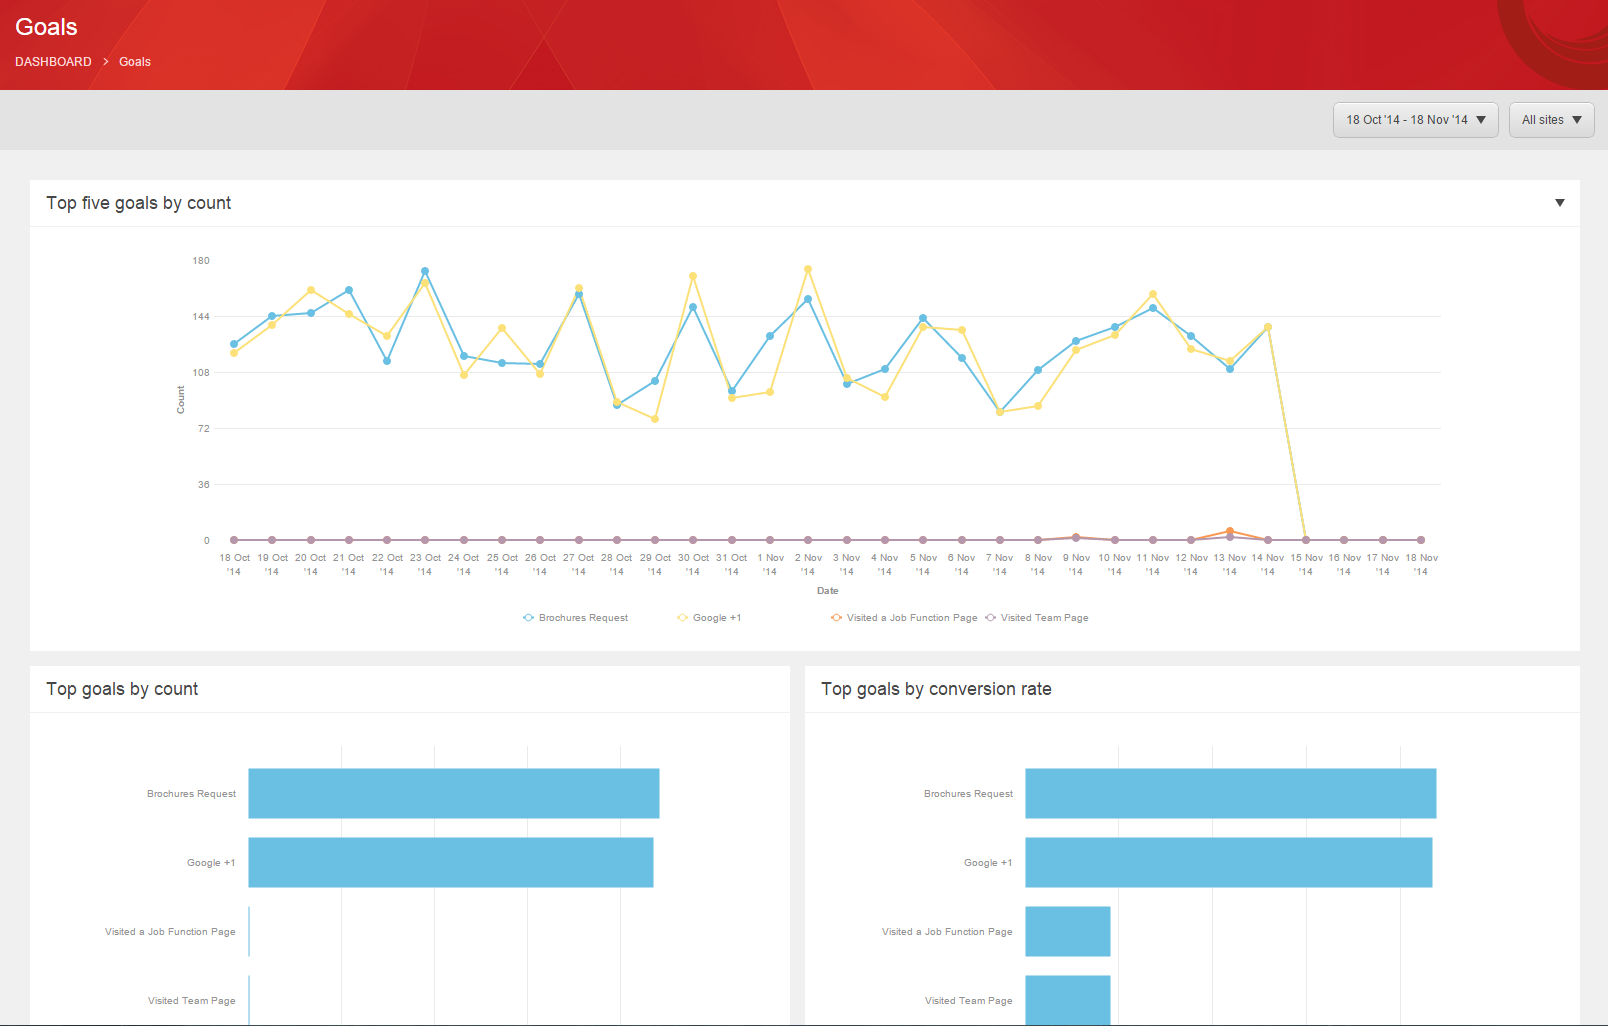 Sitecore experience analytics for monitoring goals 